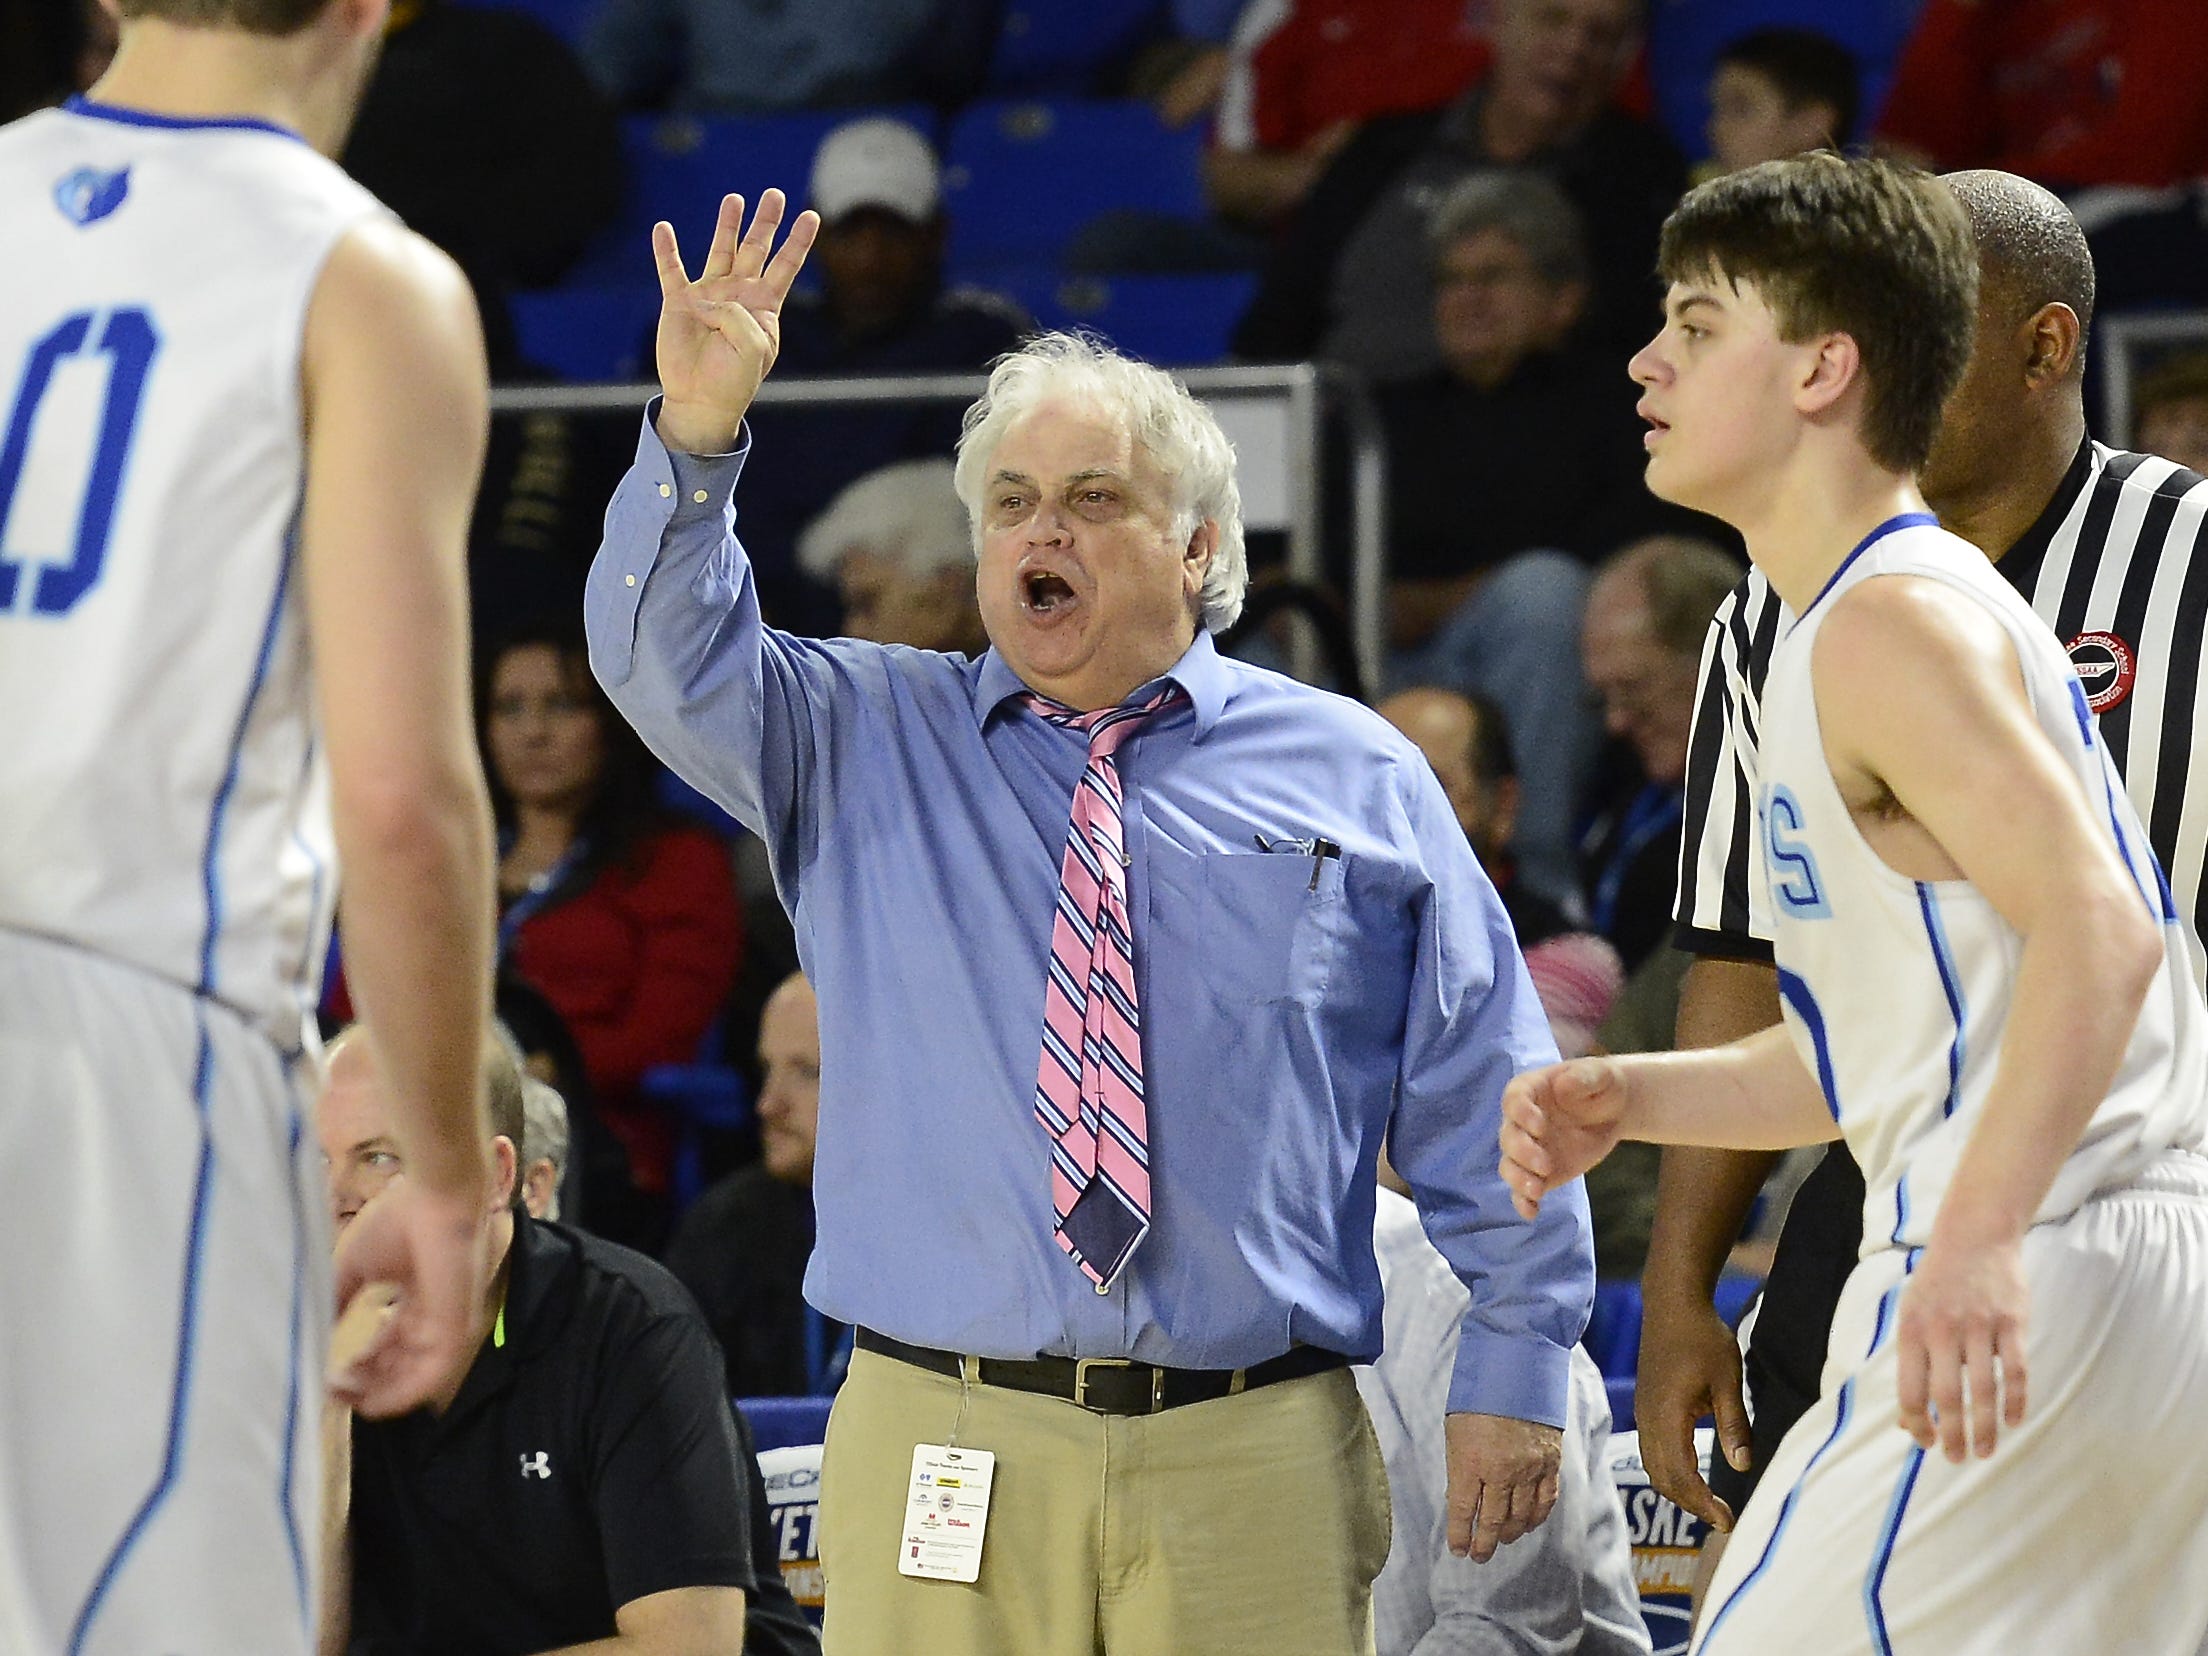 Brentwood head coach Dennis King took his squad to the Class AAA state title game.